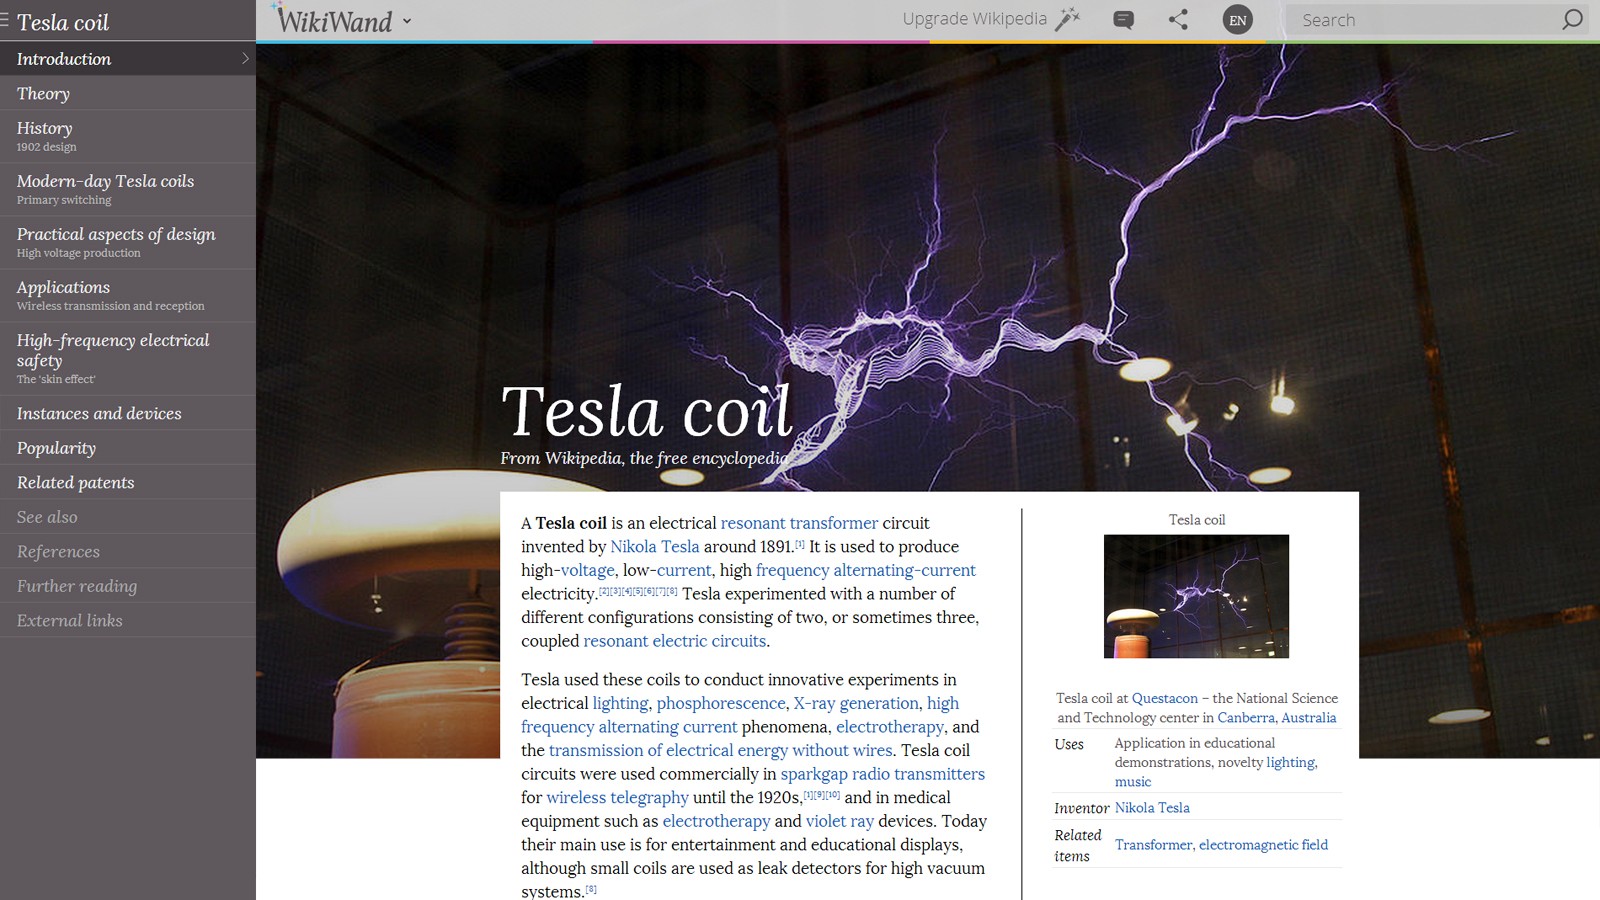 http://i1-news.softpedia-static.com/images/news2/Meet-WikiWand-the-Cool-Way-to-Browse-Wikipedia-454124-6.jpg